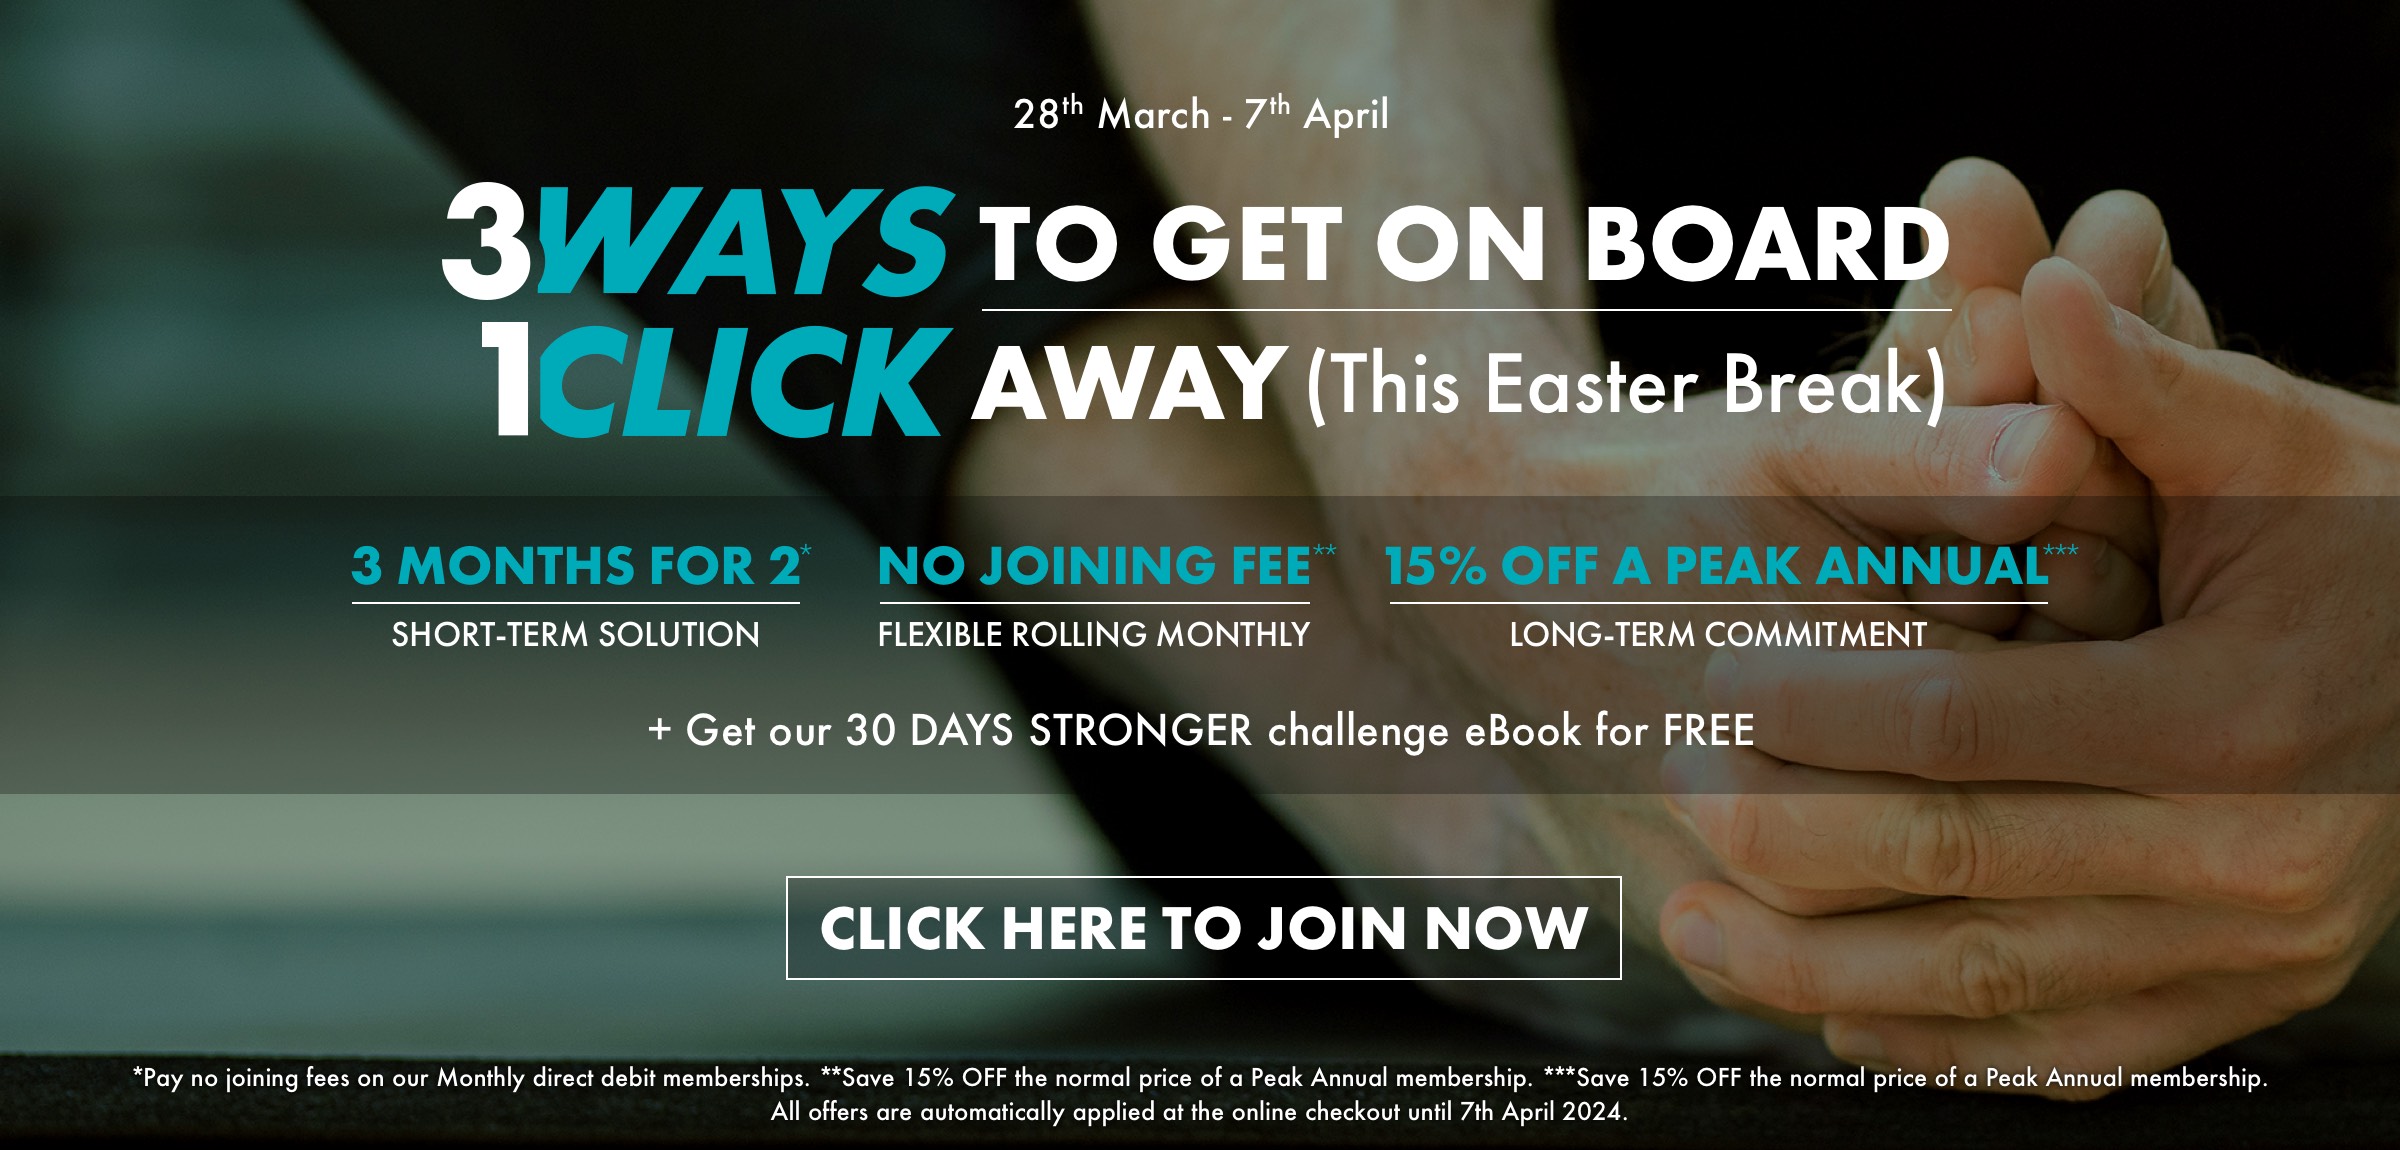 3 Ways to Get On Board - Gym Offers Easter